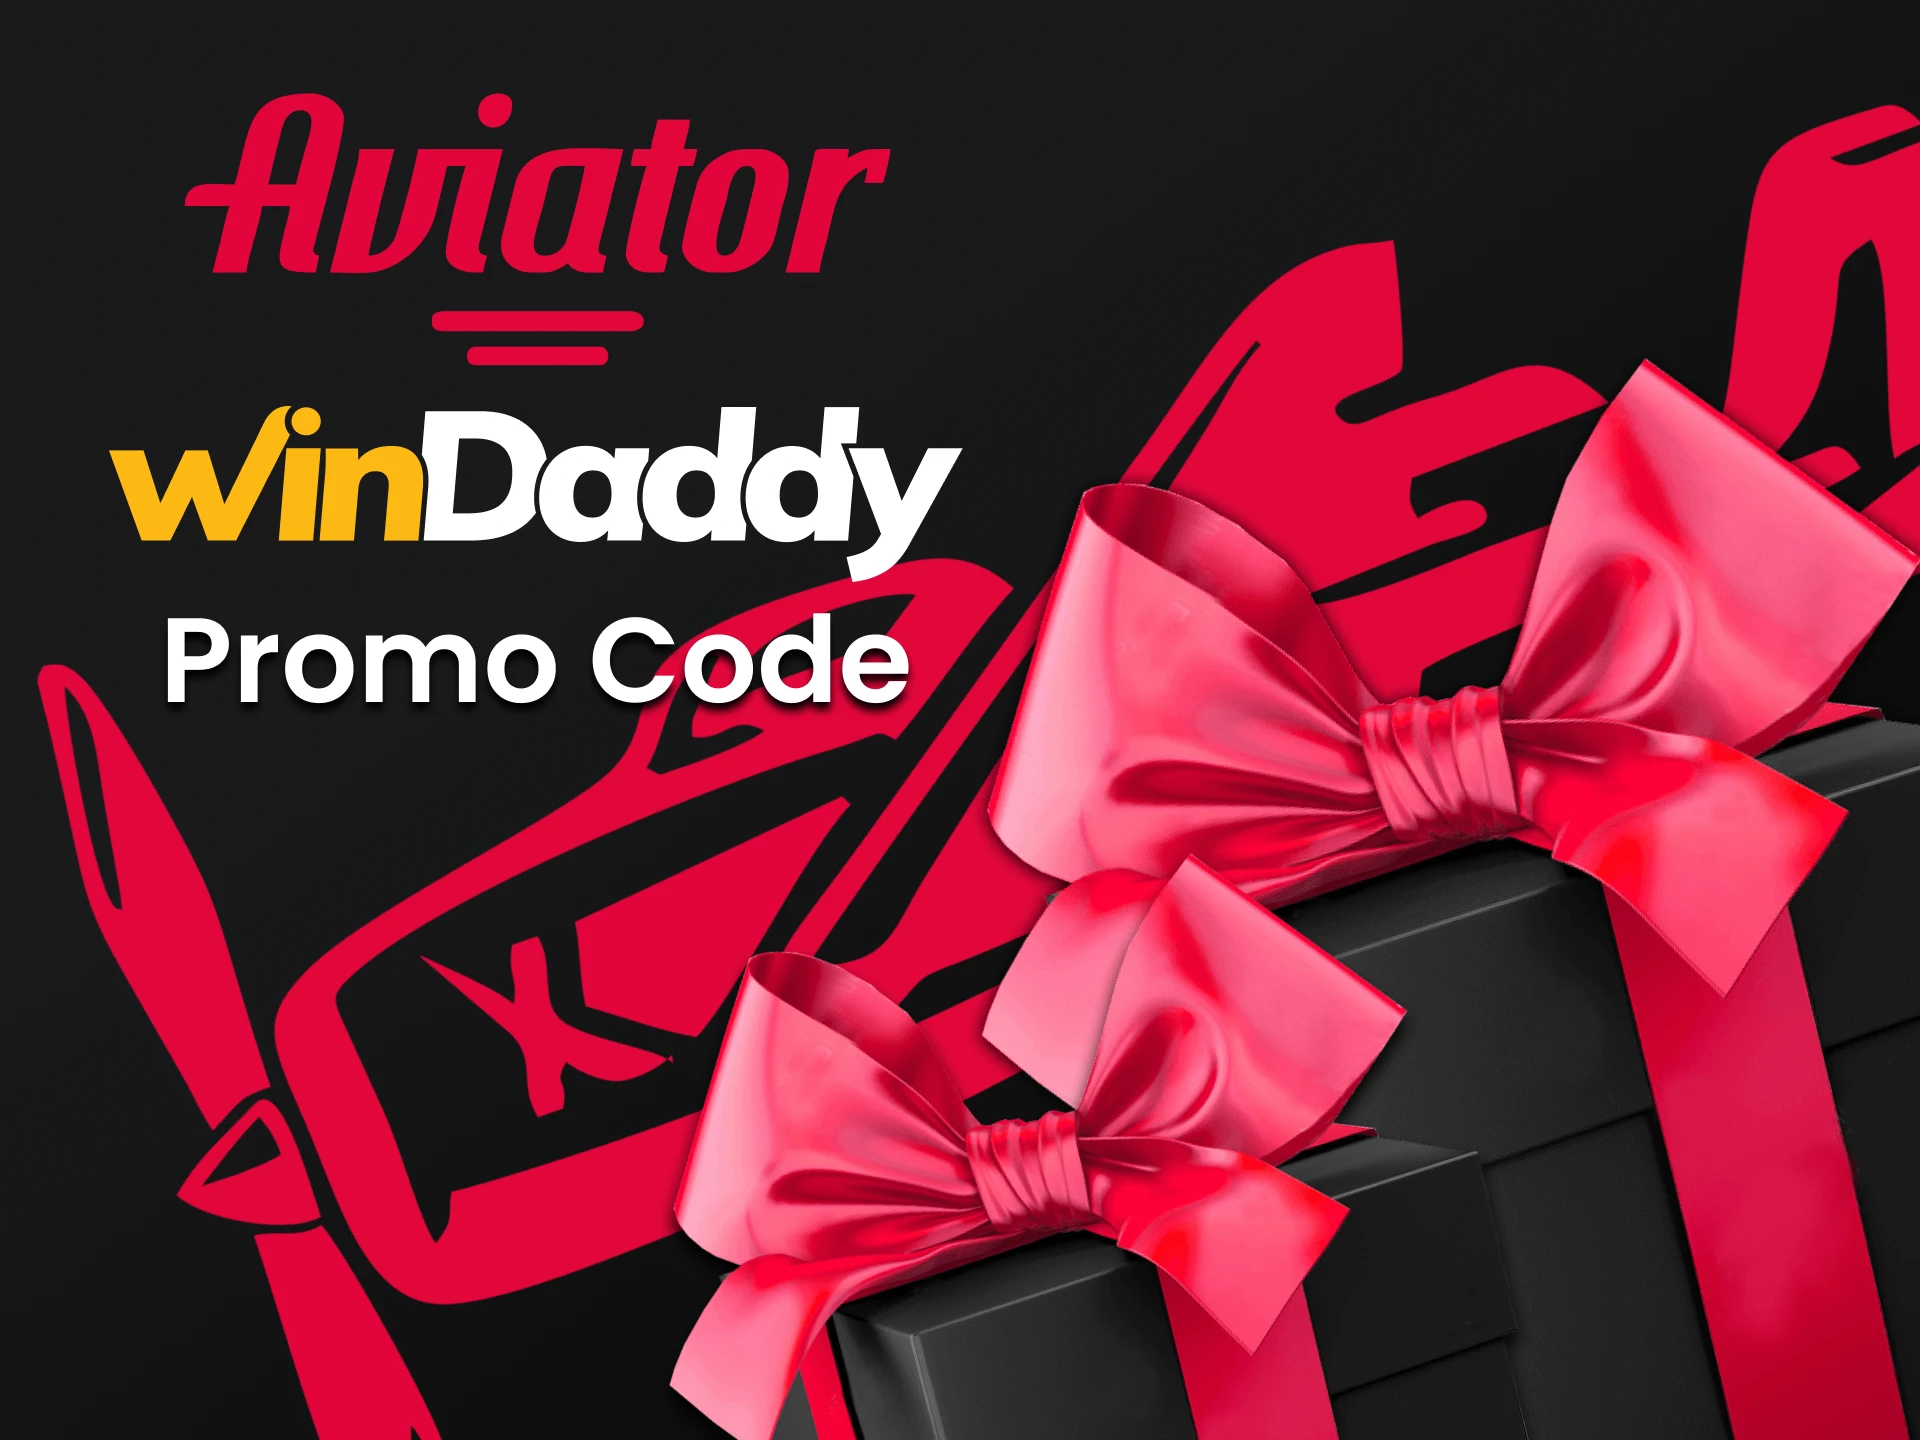 Enter a special code to receive a bonus for the Aviator from WinDaddy.